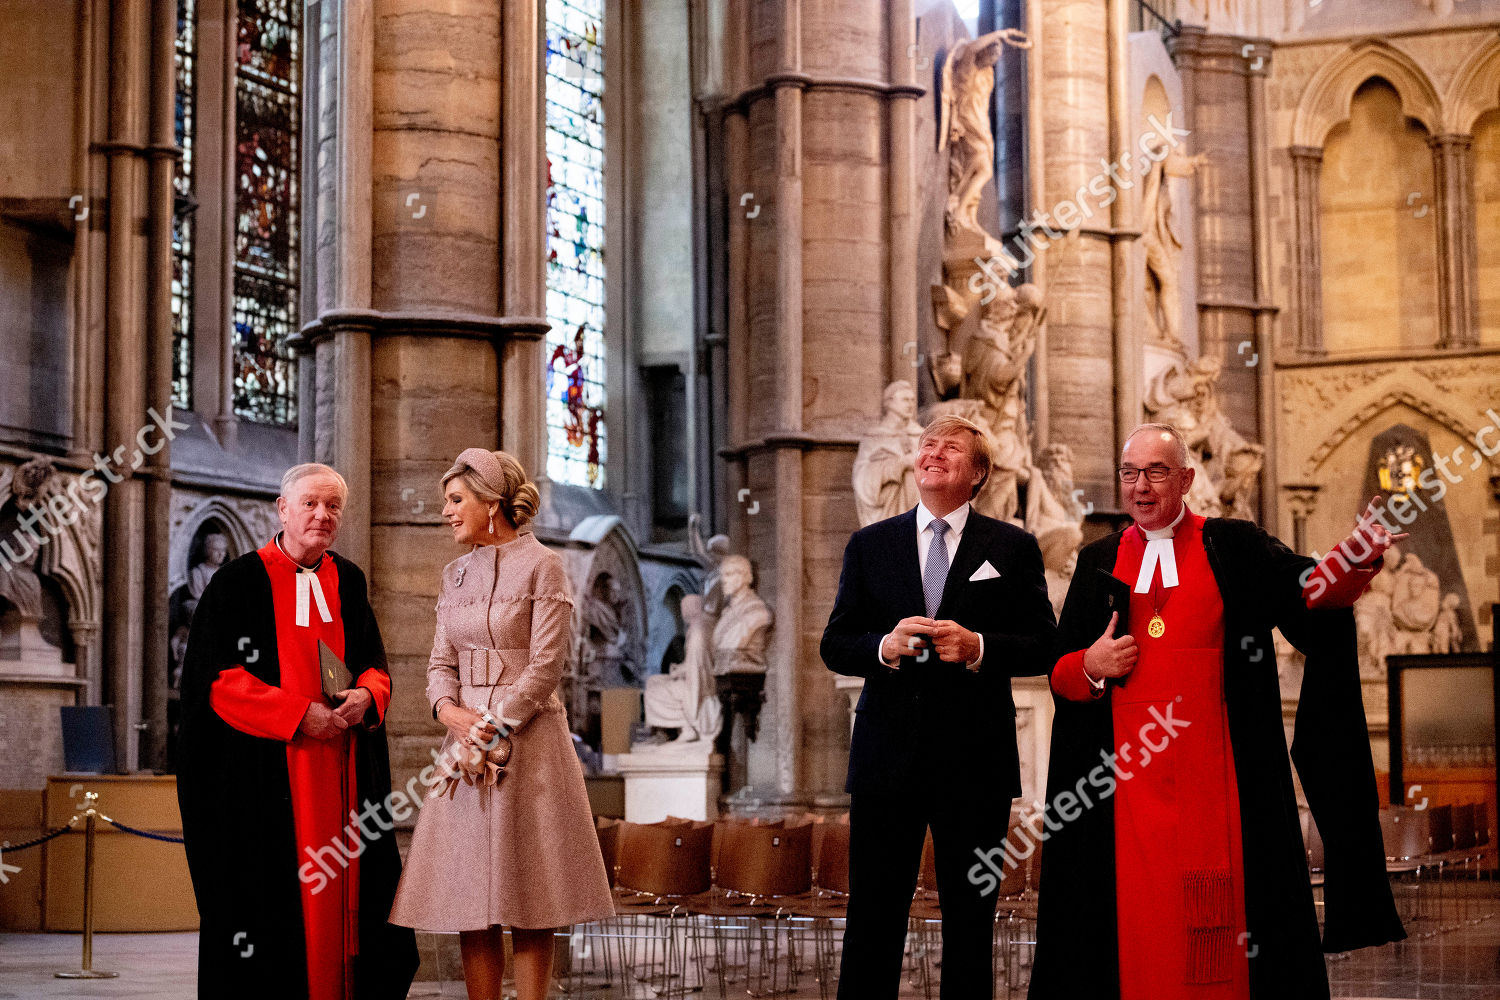 state-visit-of-the-king-and-queen-of-the-netherlands-london-uk-shutterstock-editorial-9942301dk.jpg